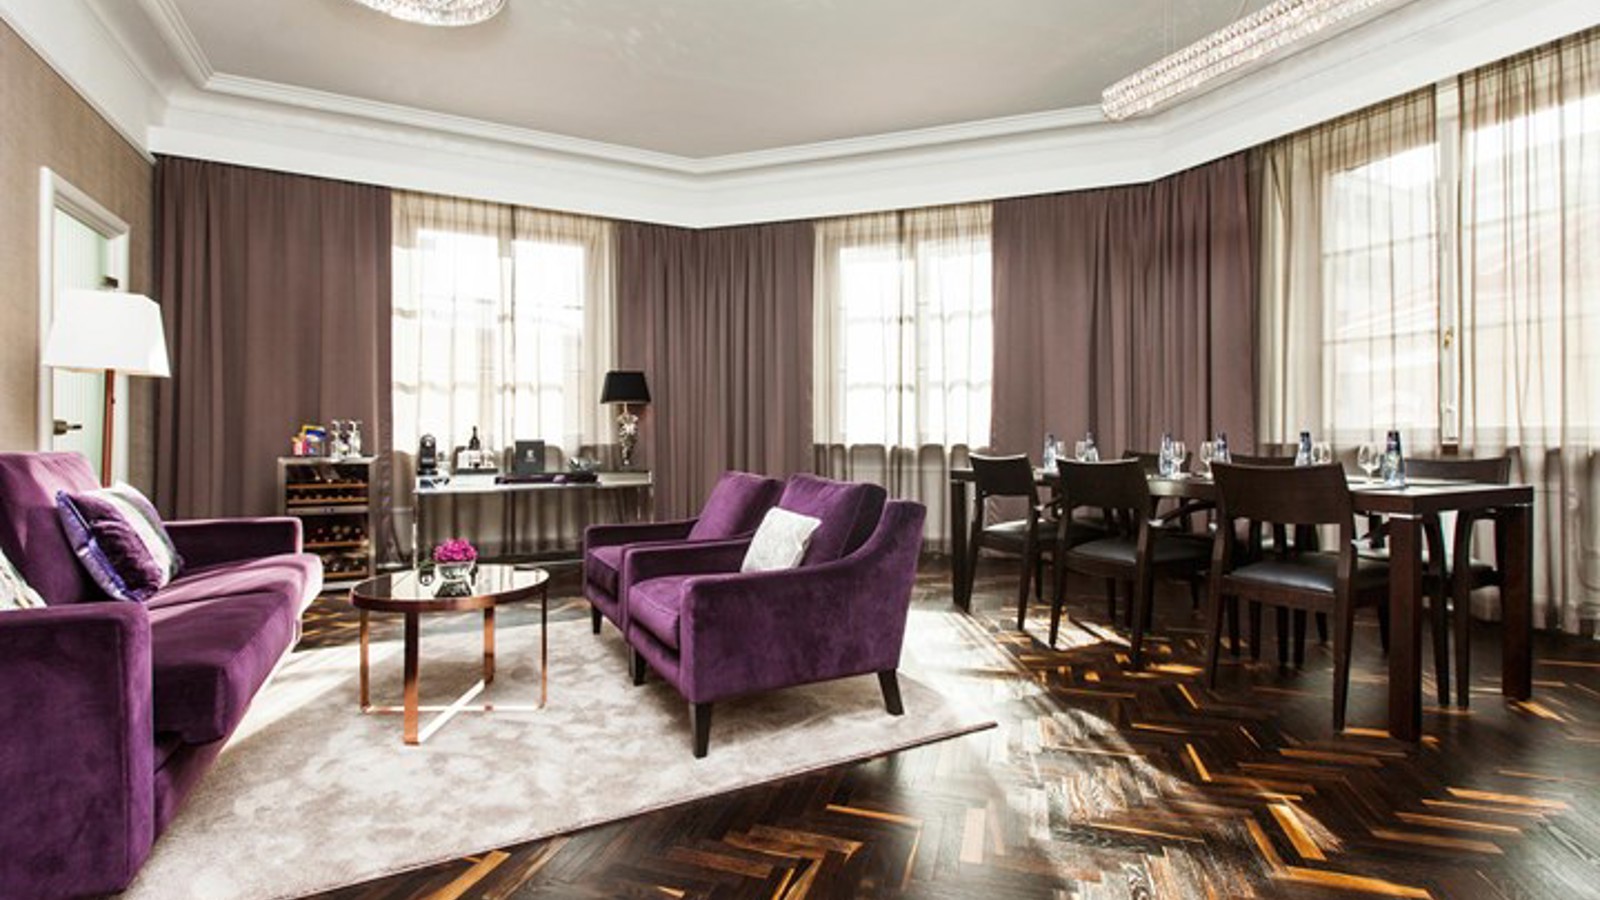 Room with purple sofa and armchairs, as well as a desk and conference table